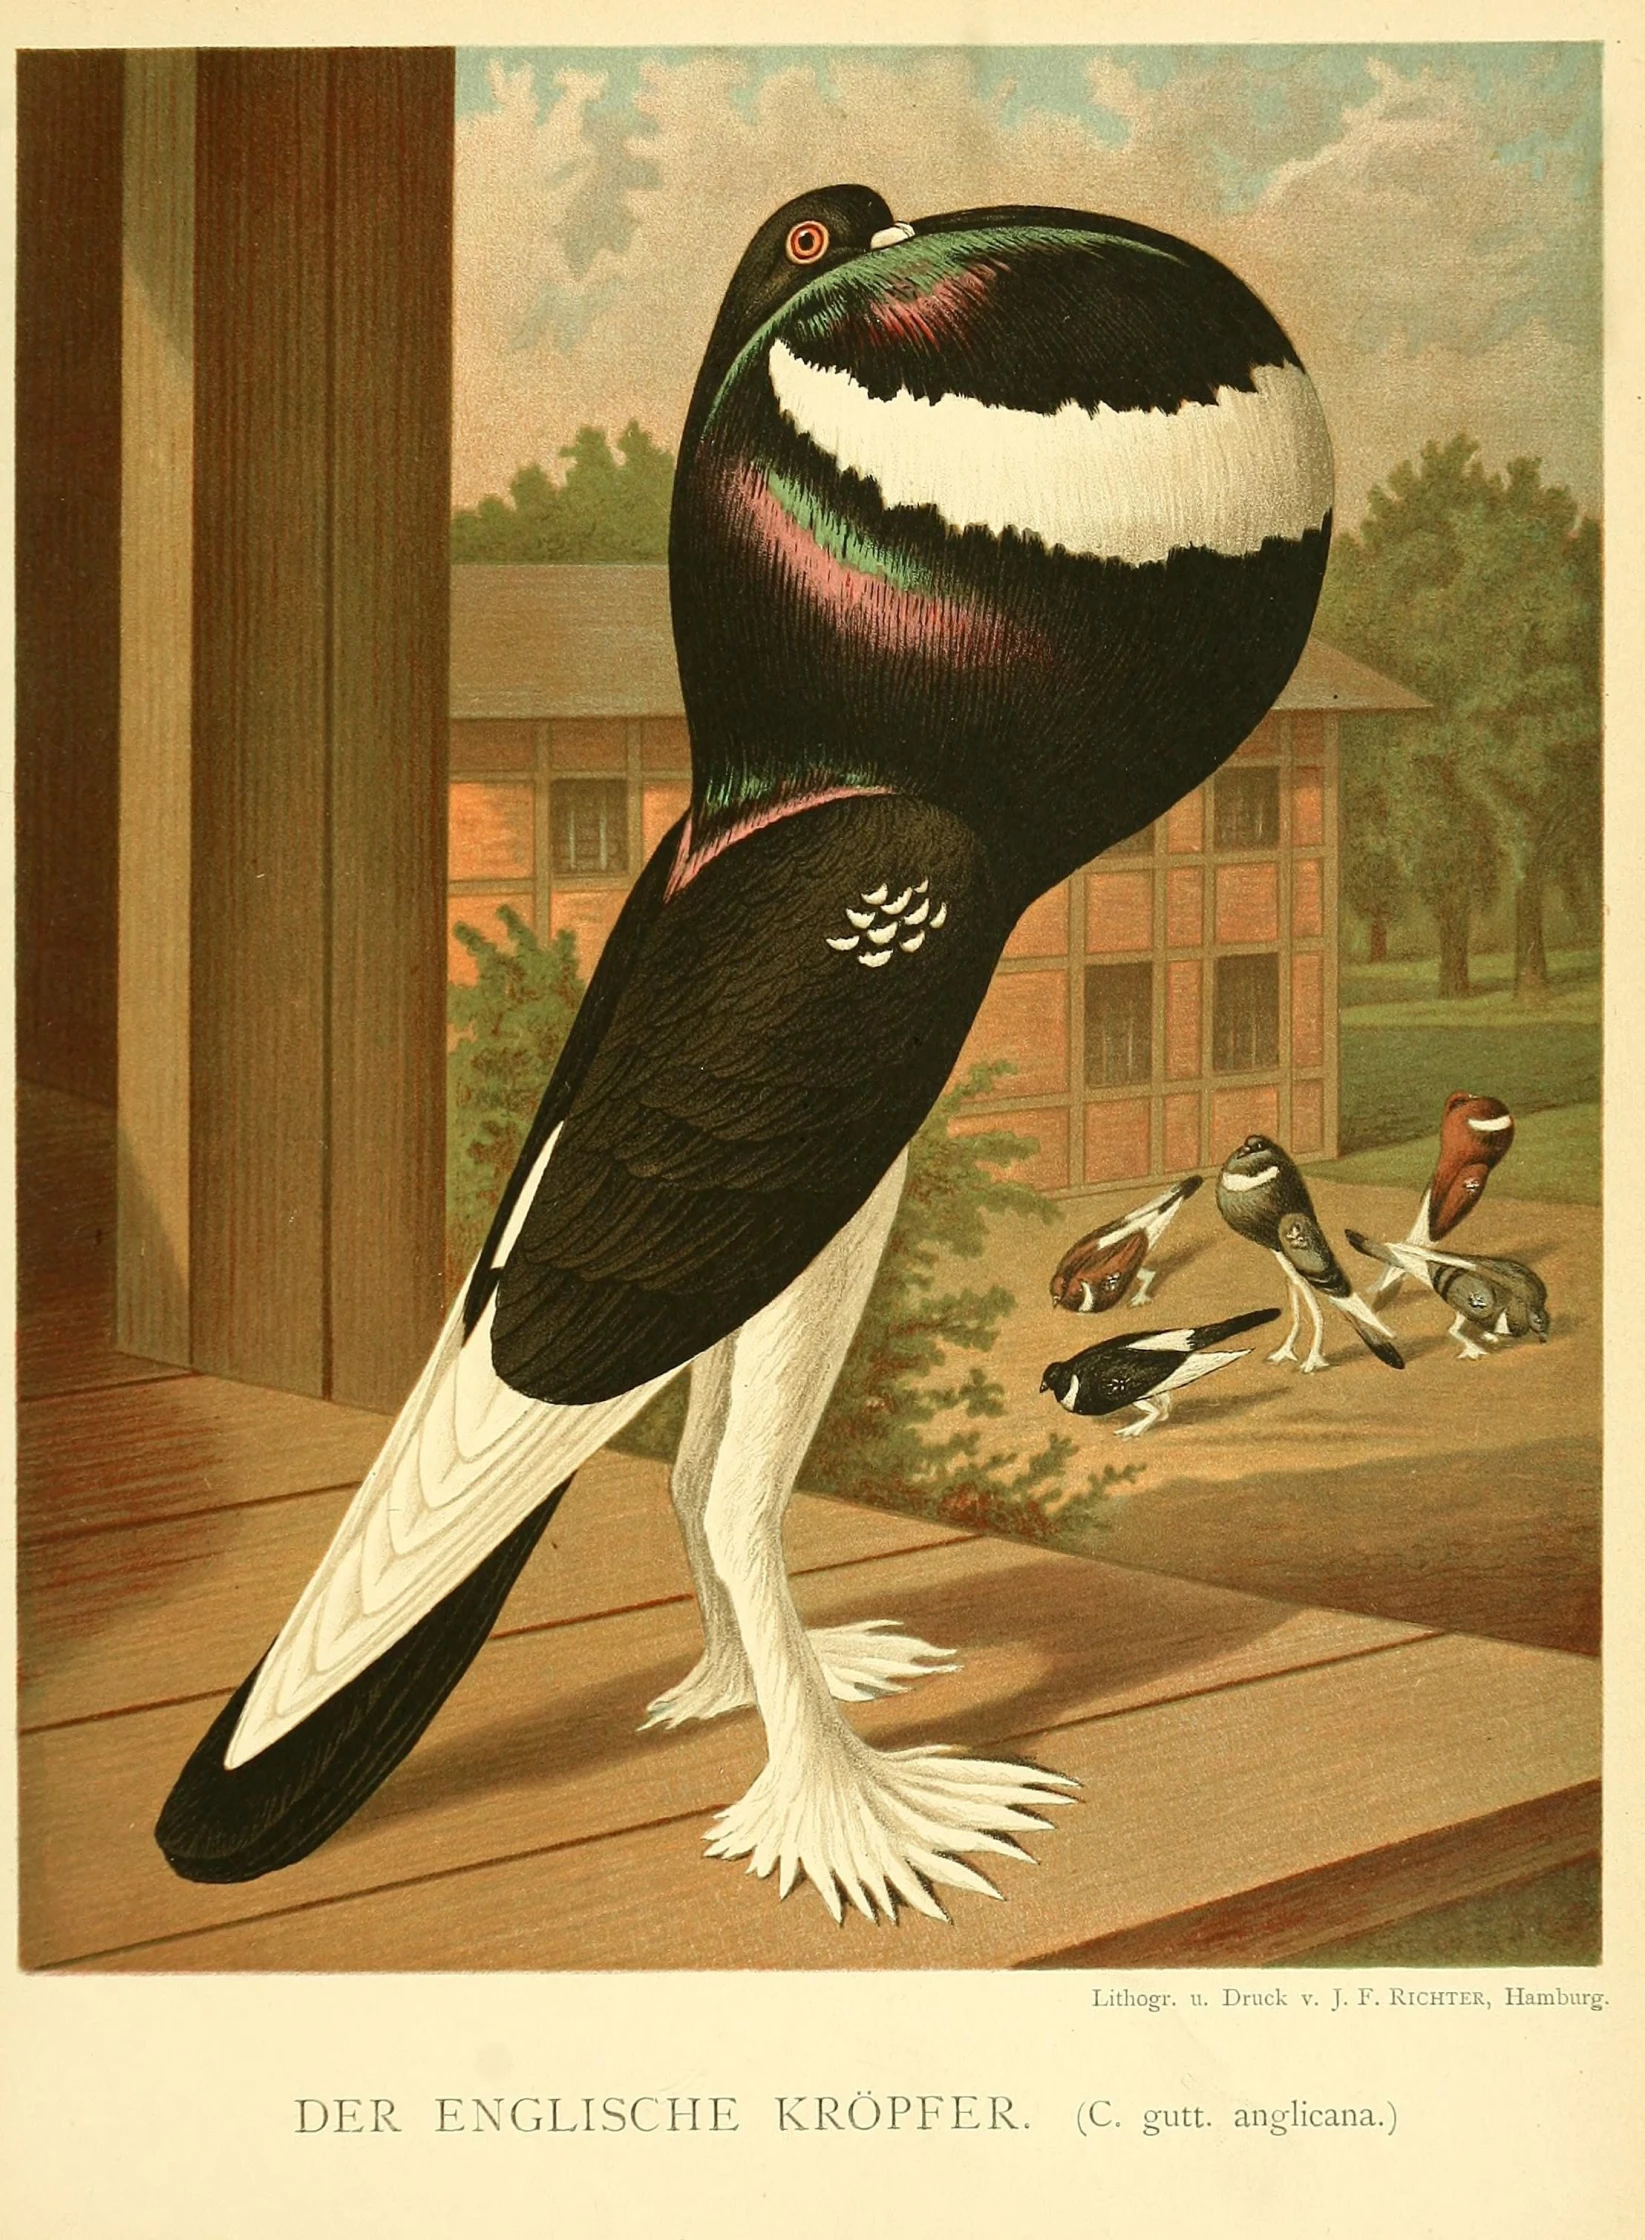 an illustration of a large black bird on a deck